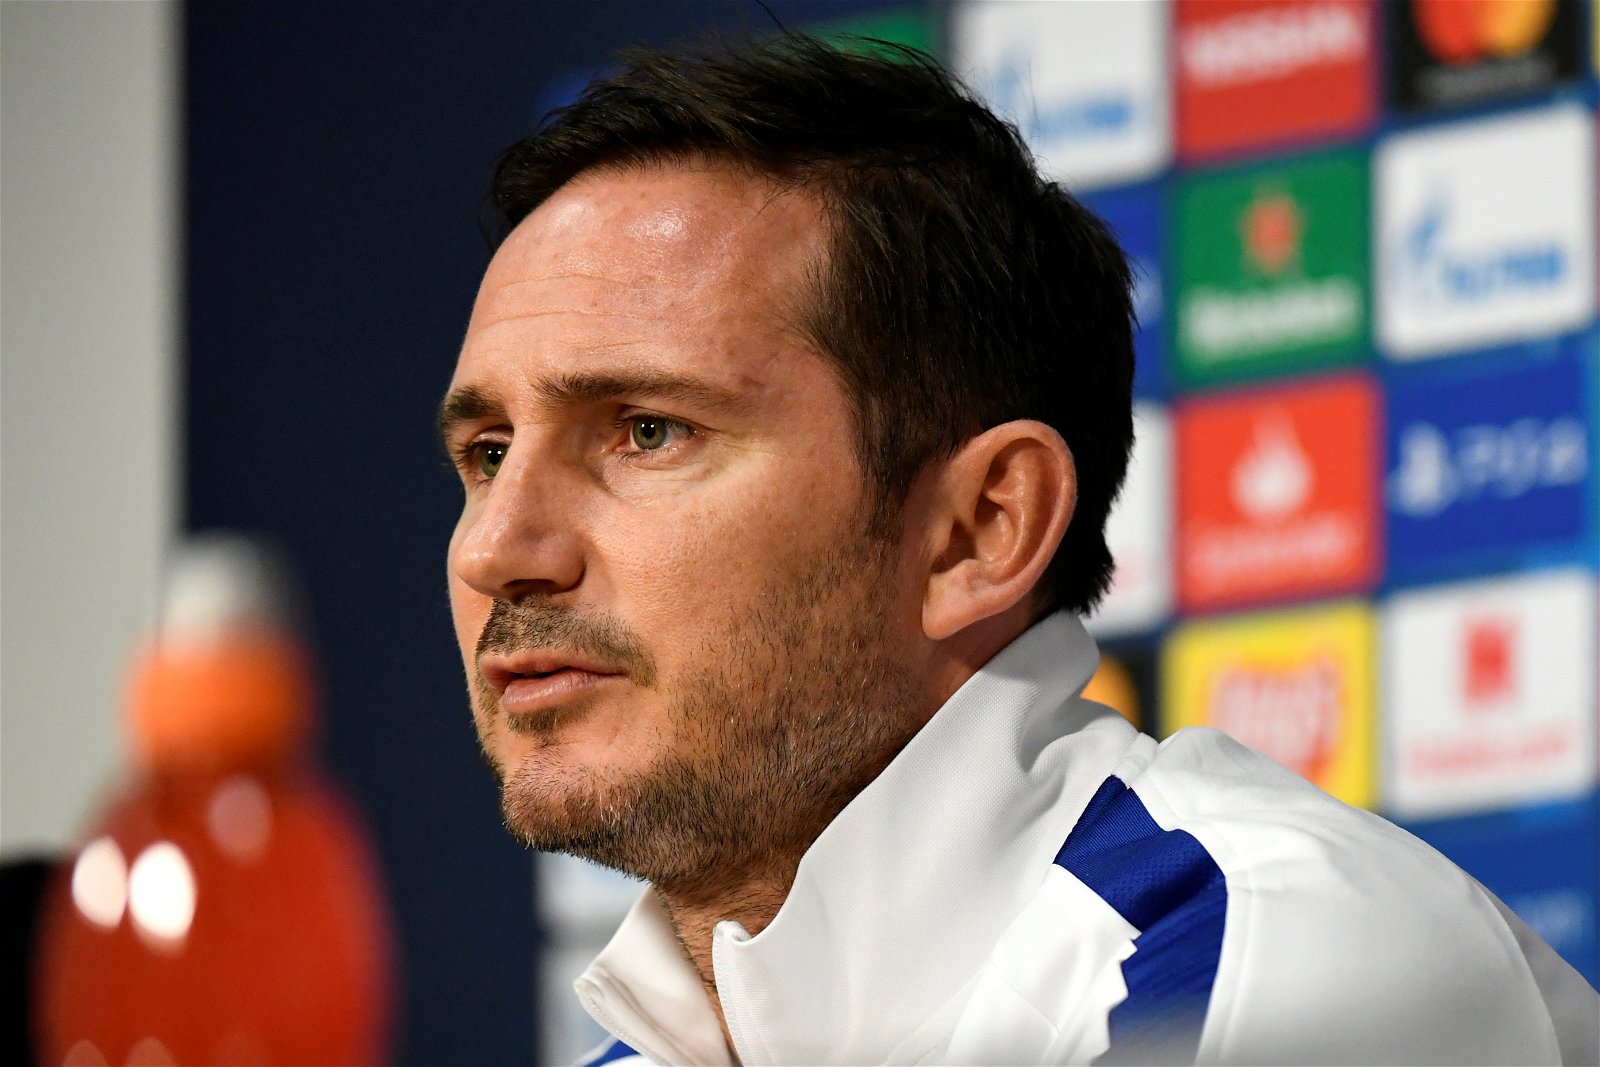 Lampard has Emery on the ropes